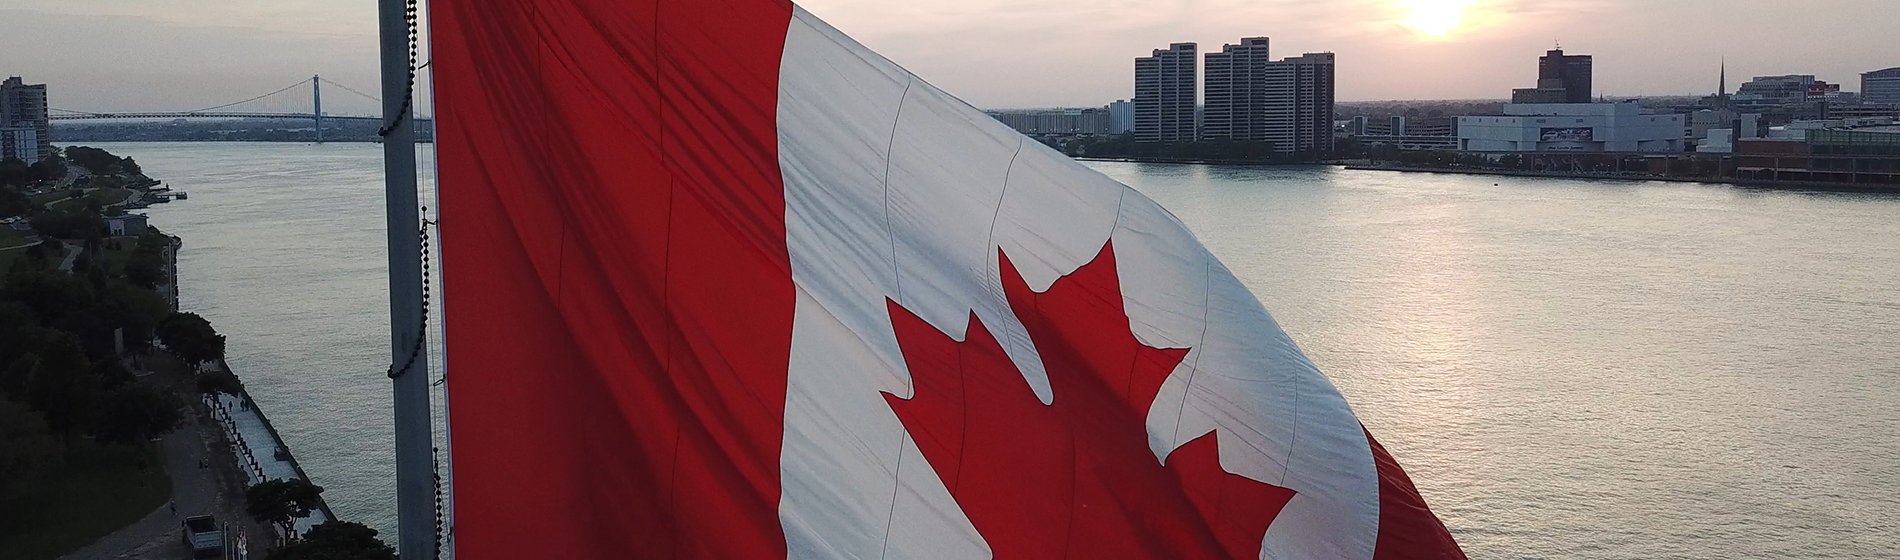 Aerial view of Canadian flag with Windsor and Detroit skyline in the background